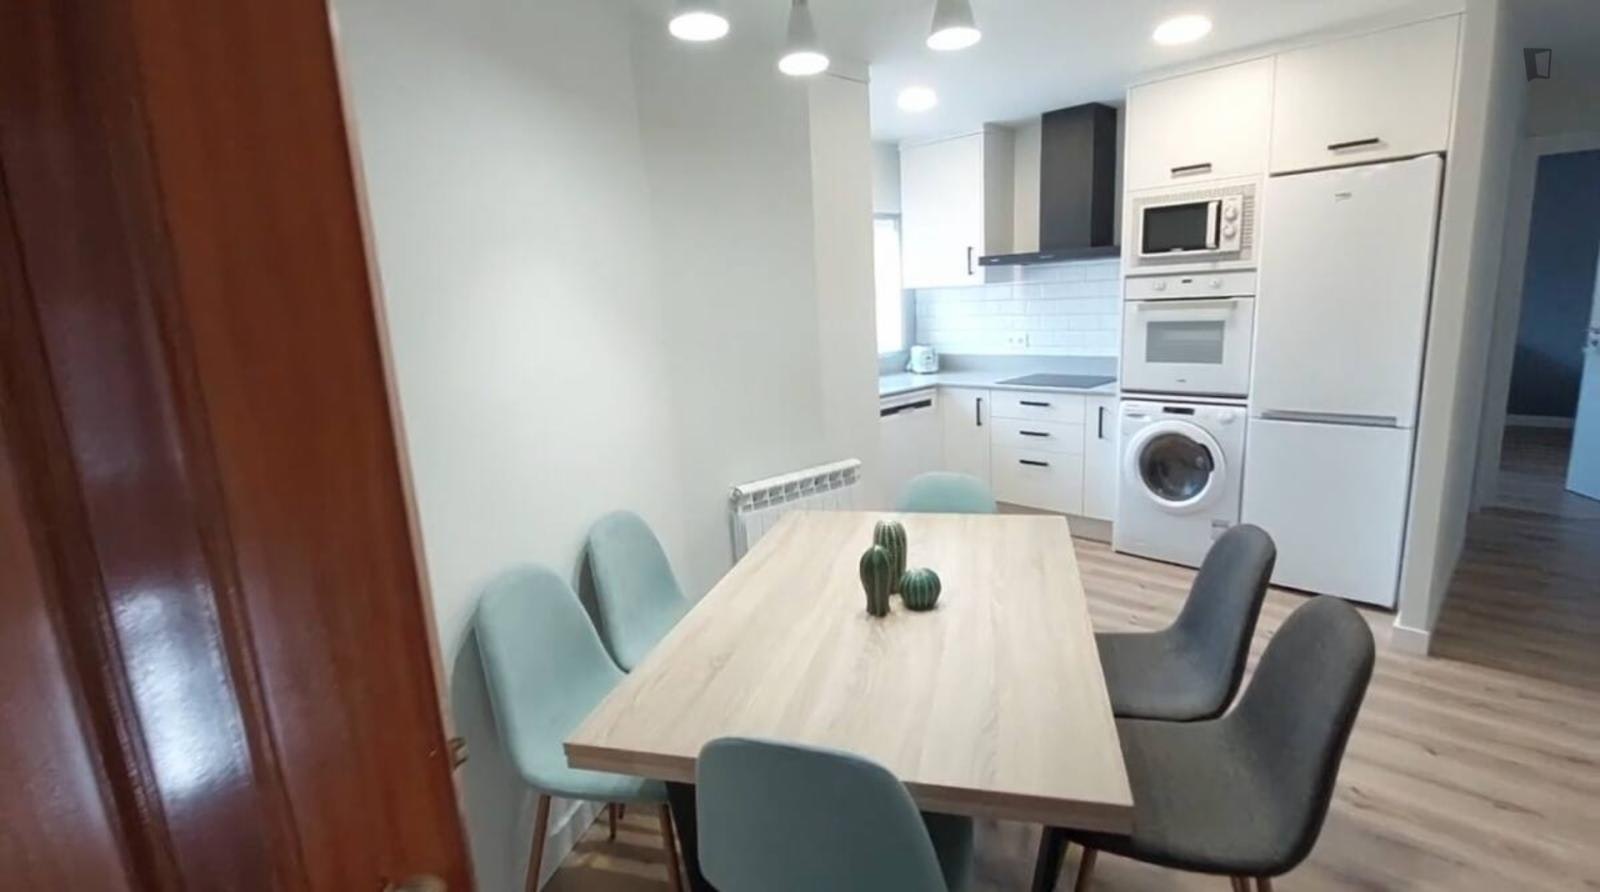 Welcoming double bedroom in a student flat, near the centre of Salamanca